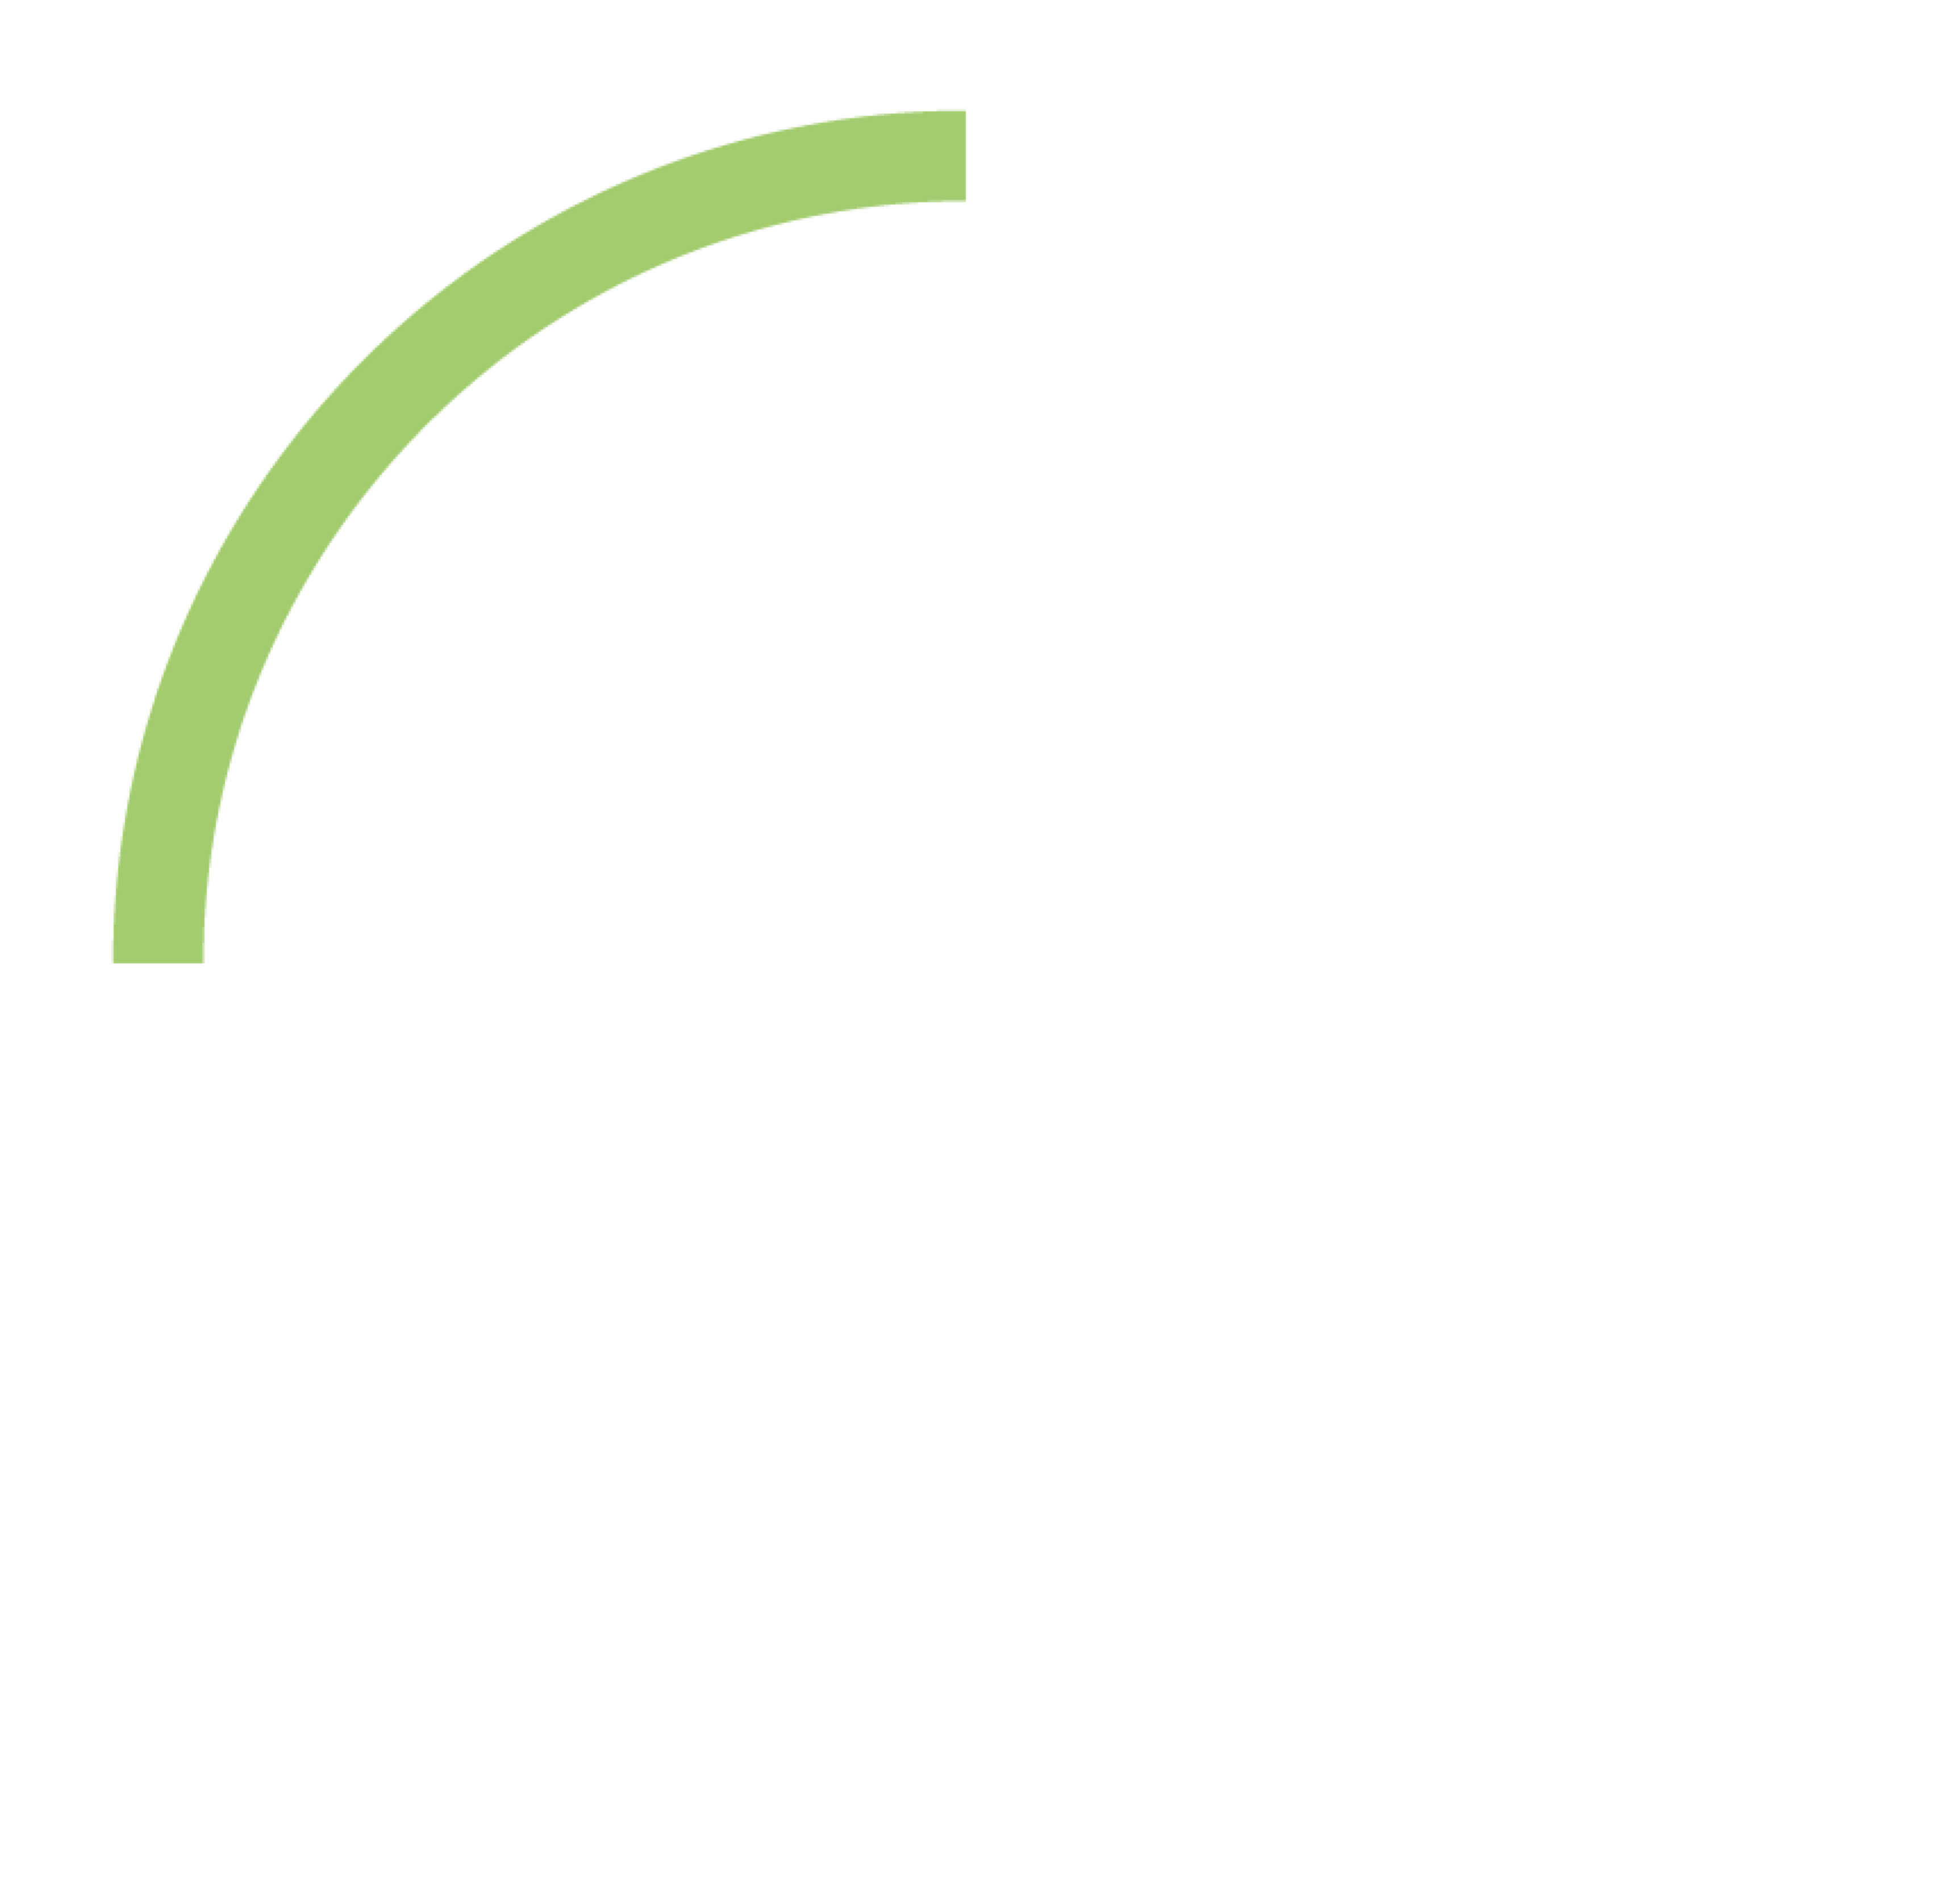 A circular icon with three circles in the center representing OneTrust ESG and Sustainability.